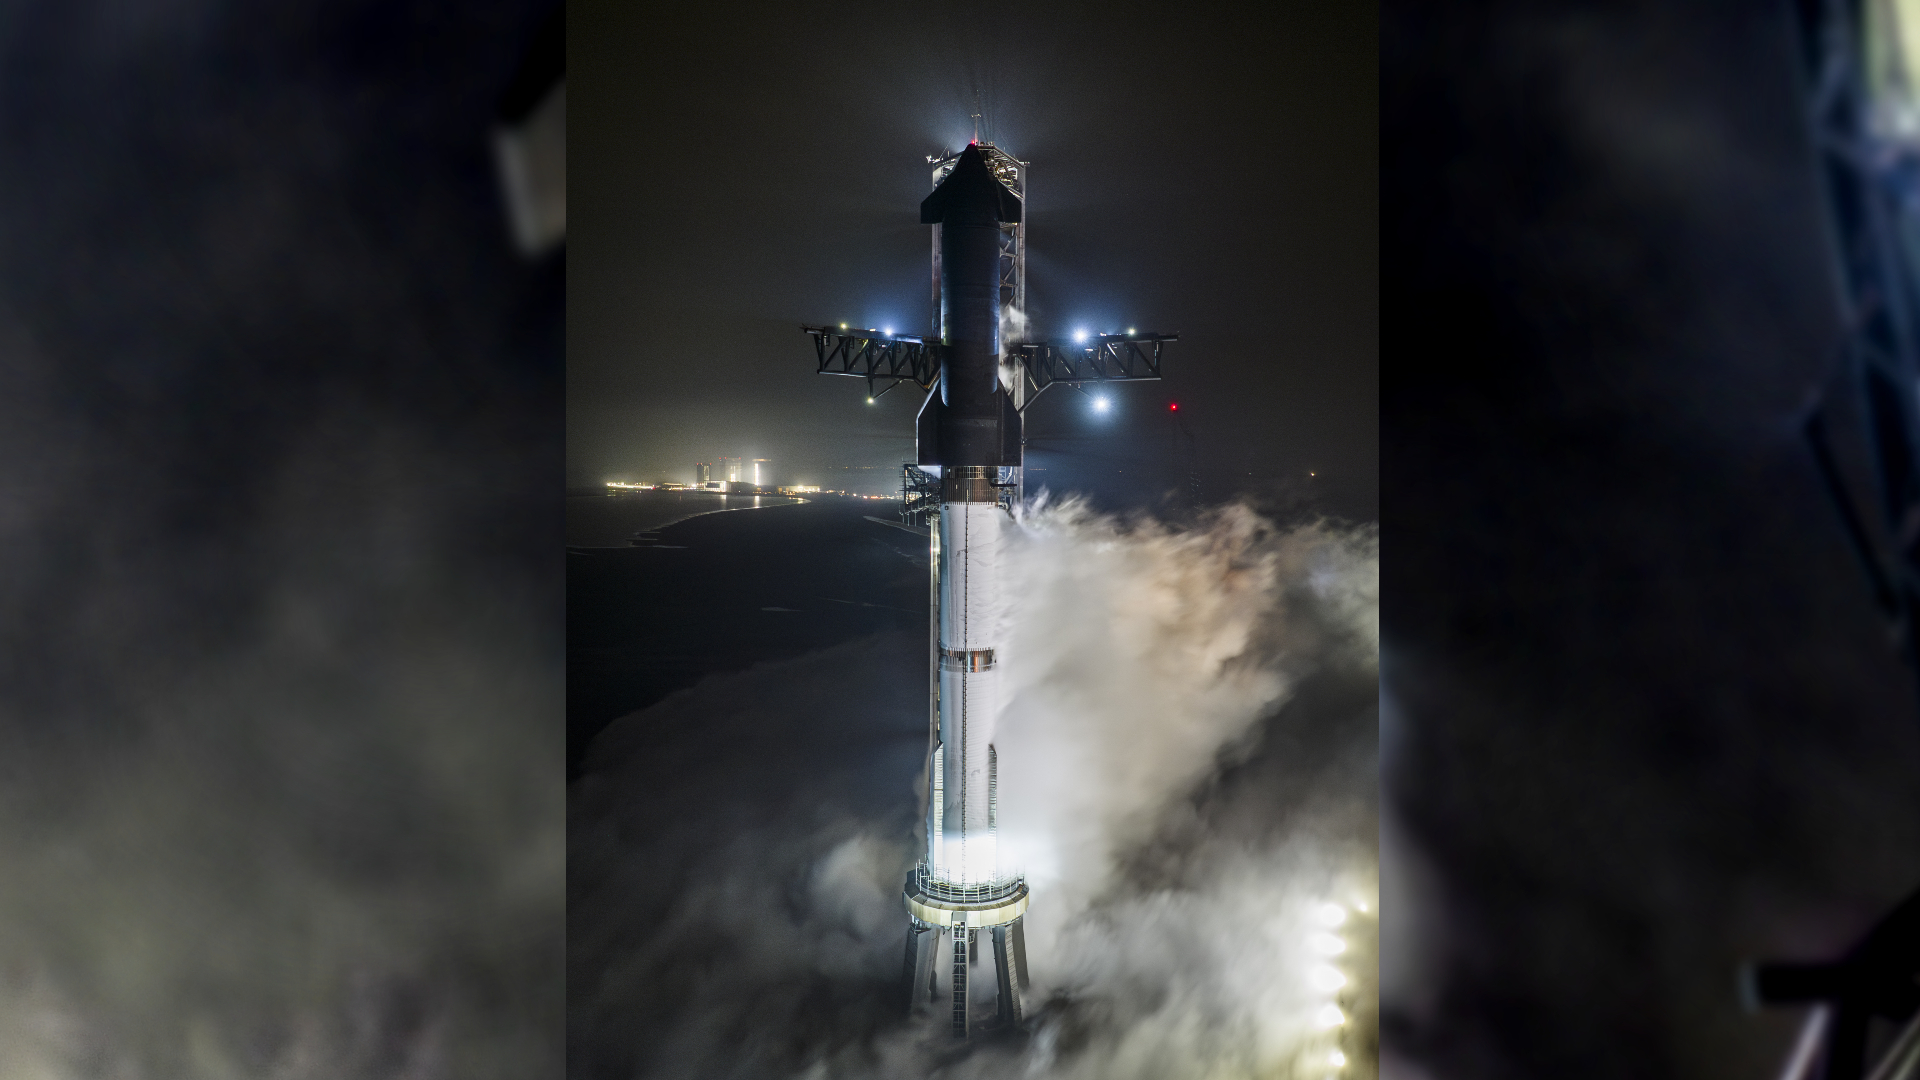 A Starship Flight 3 rocket and Super Heavy booster above the launch pad at night in a fueling test